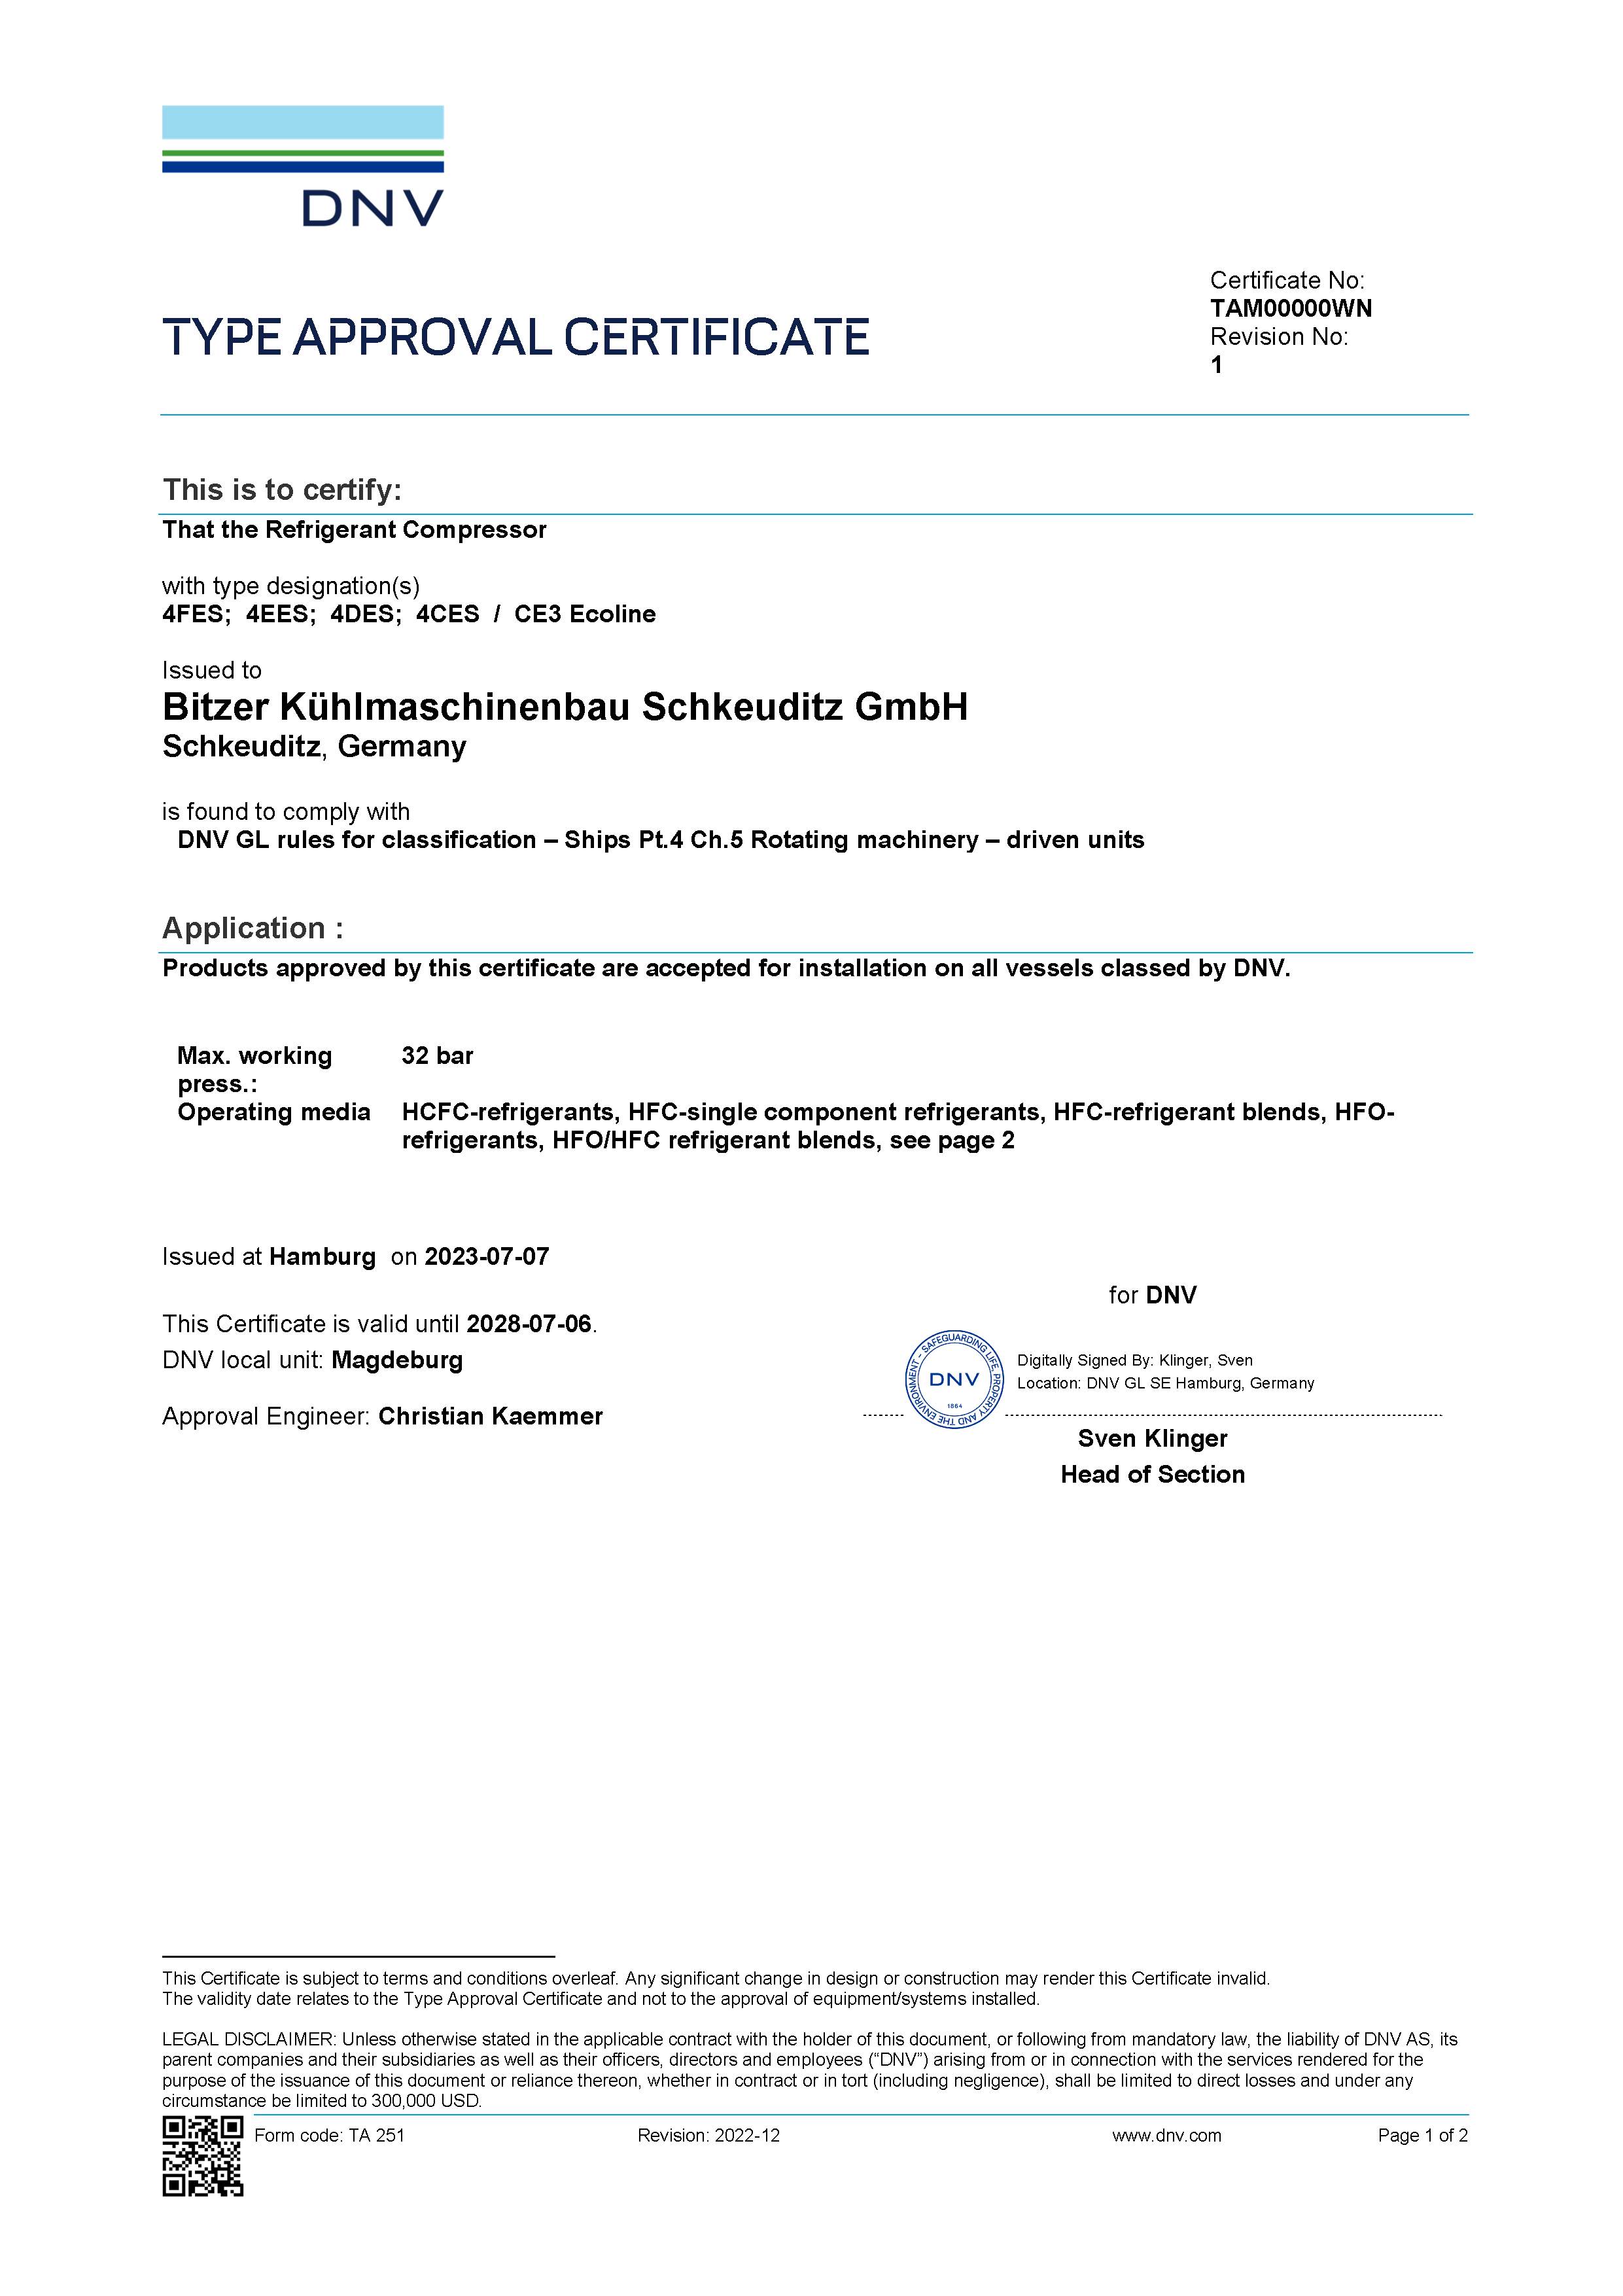 Approval Certificate for CE3